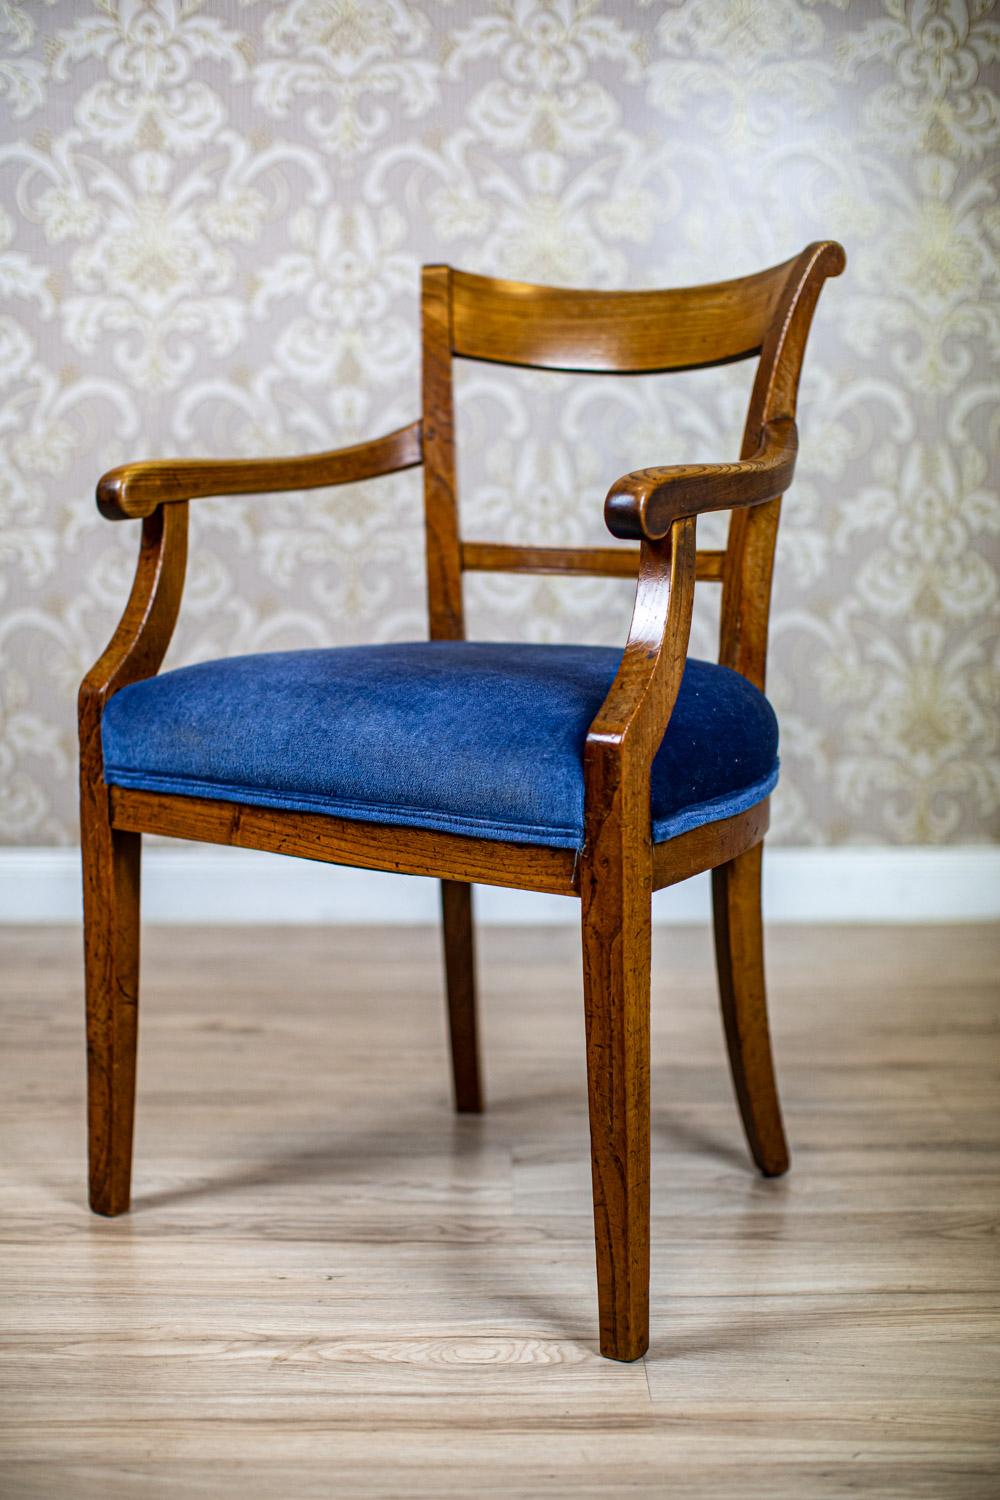 Elm Armchair from the Early 20th Century in Blue Upholstery

We present you an upholstered armchair from the early 20th century.
It is made of elm wood.
This item is in incredibly good condition and has been refreshed with wax.